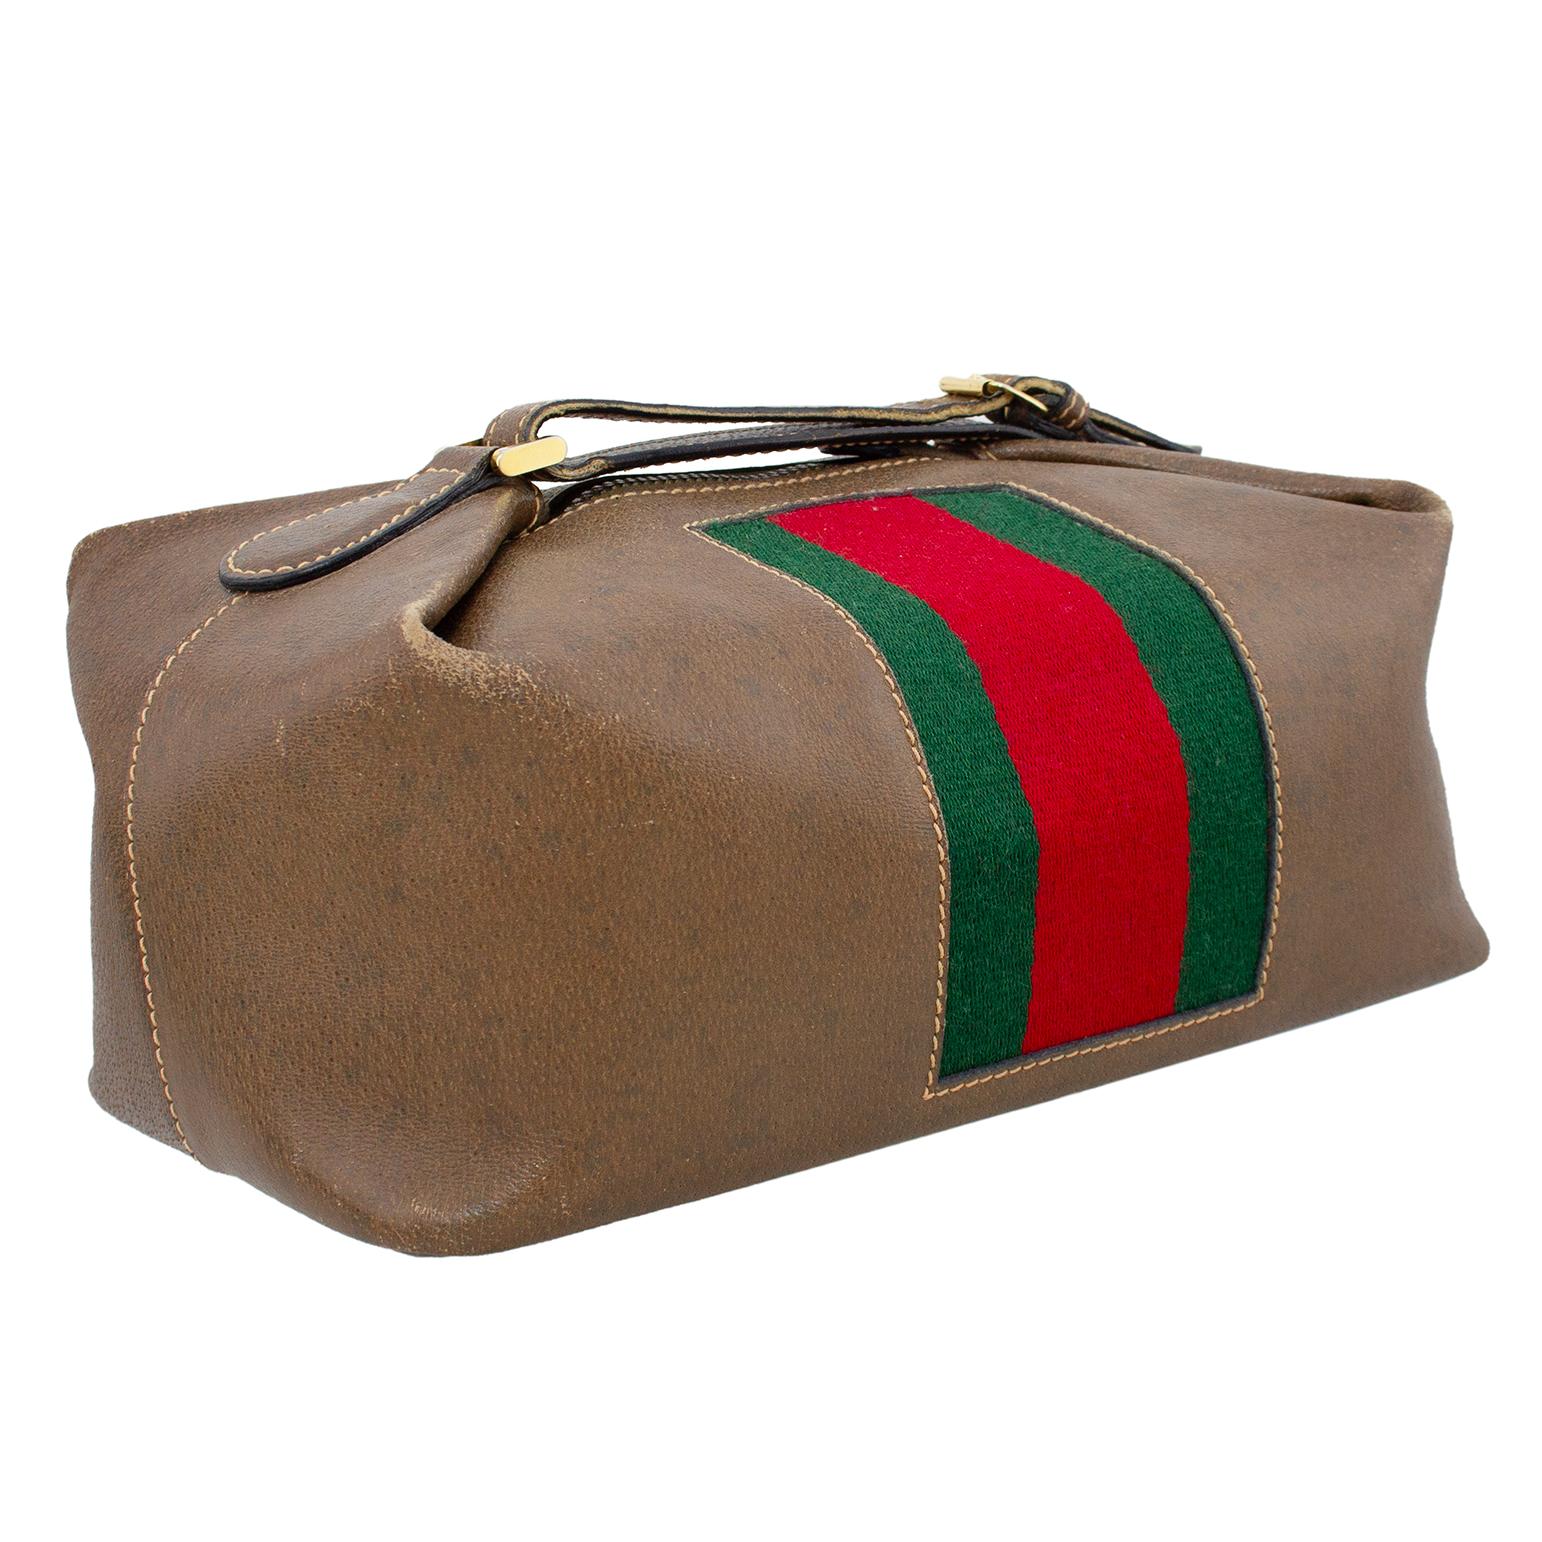 Gucci cosmetic bag from the 1970s. Pebbled light brown leather with tan top stitching and a thick centre green and red canvas webbing centre vertical stripe. Gold top metal zipper with a handle that loops and fastens with a buckle. Good vintage